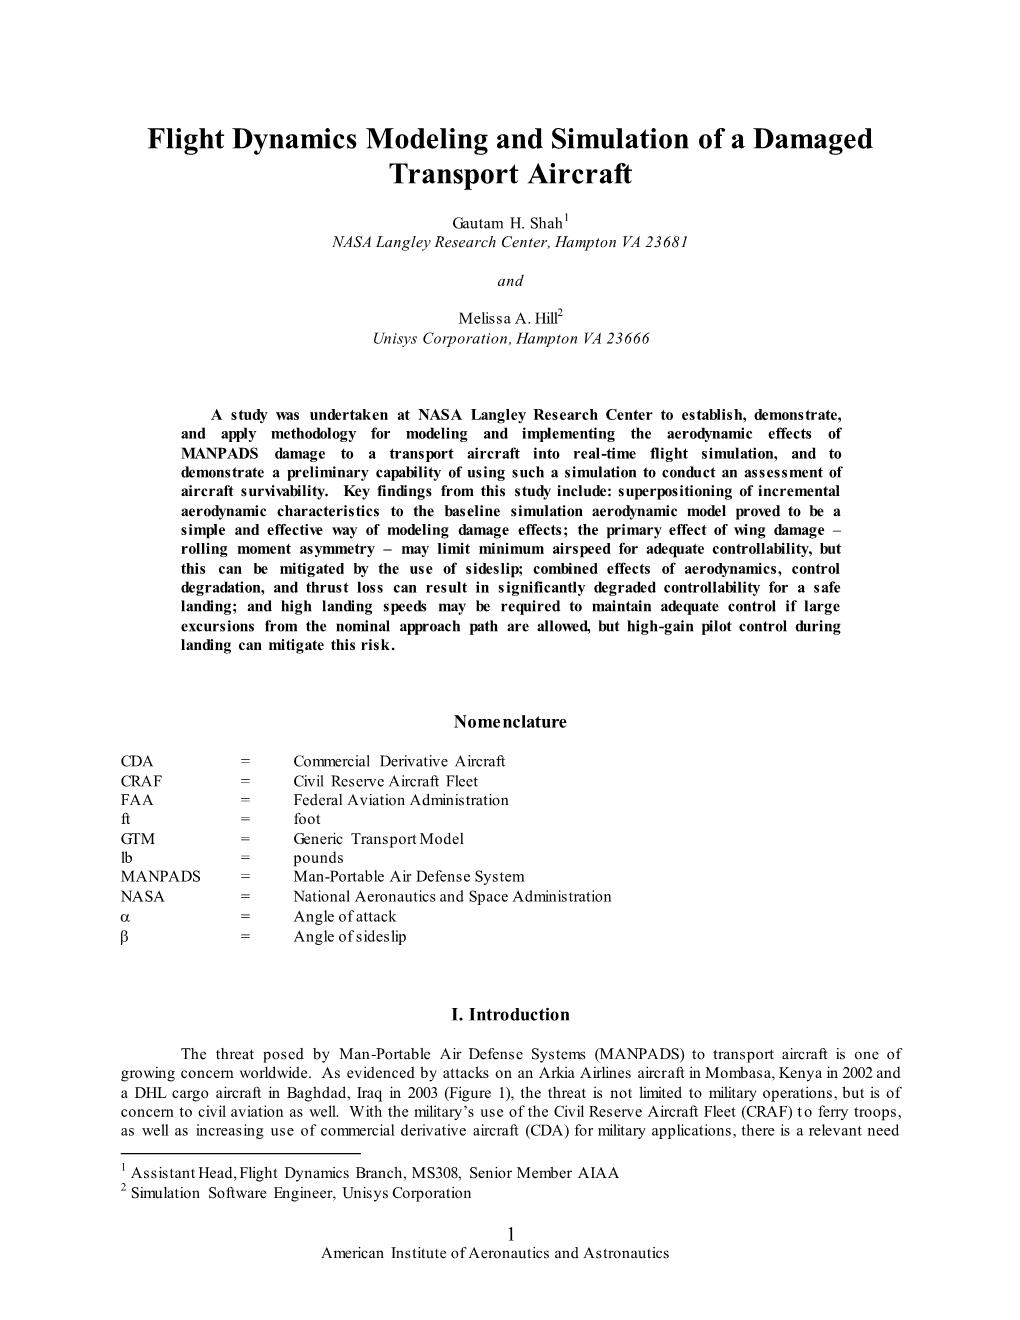 Flight Dynamics Modeling and Simulation of a Damaged Transport Aircraft